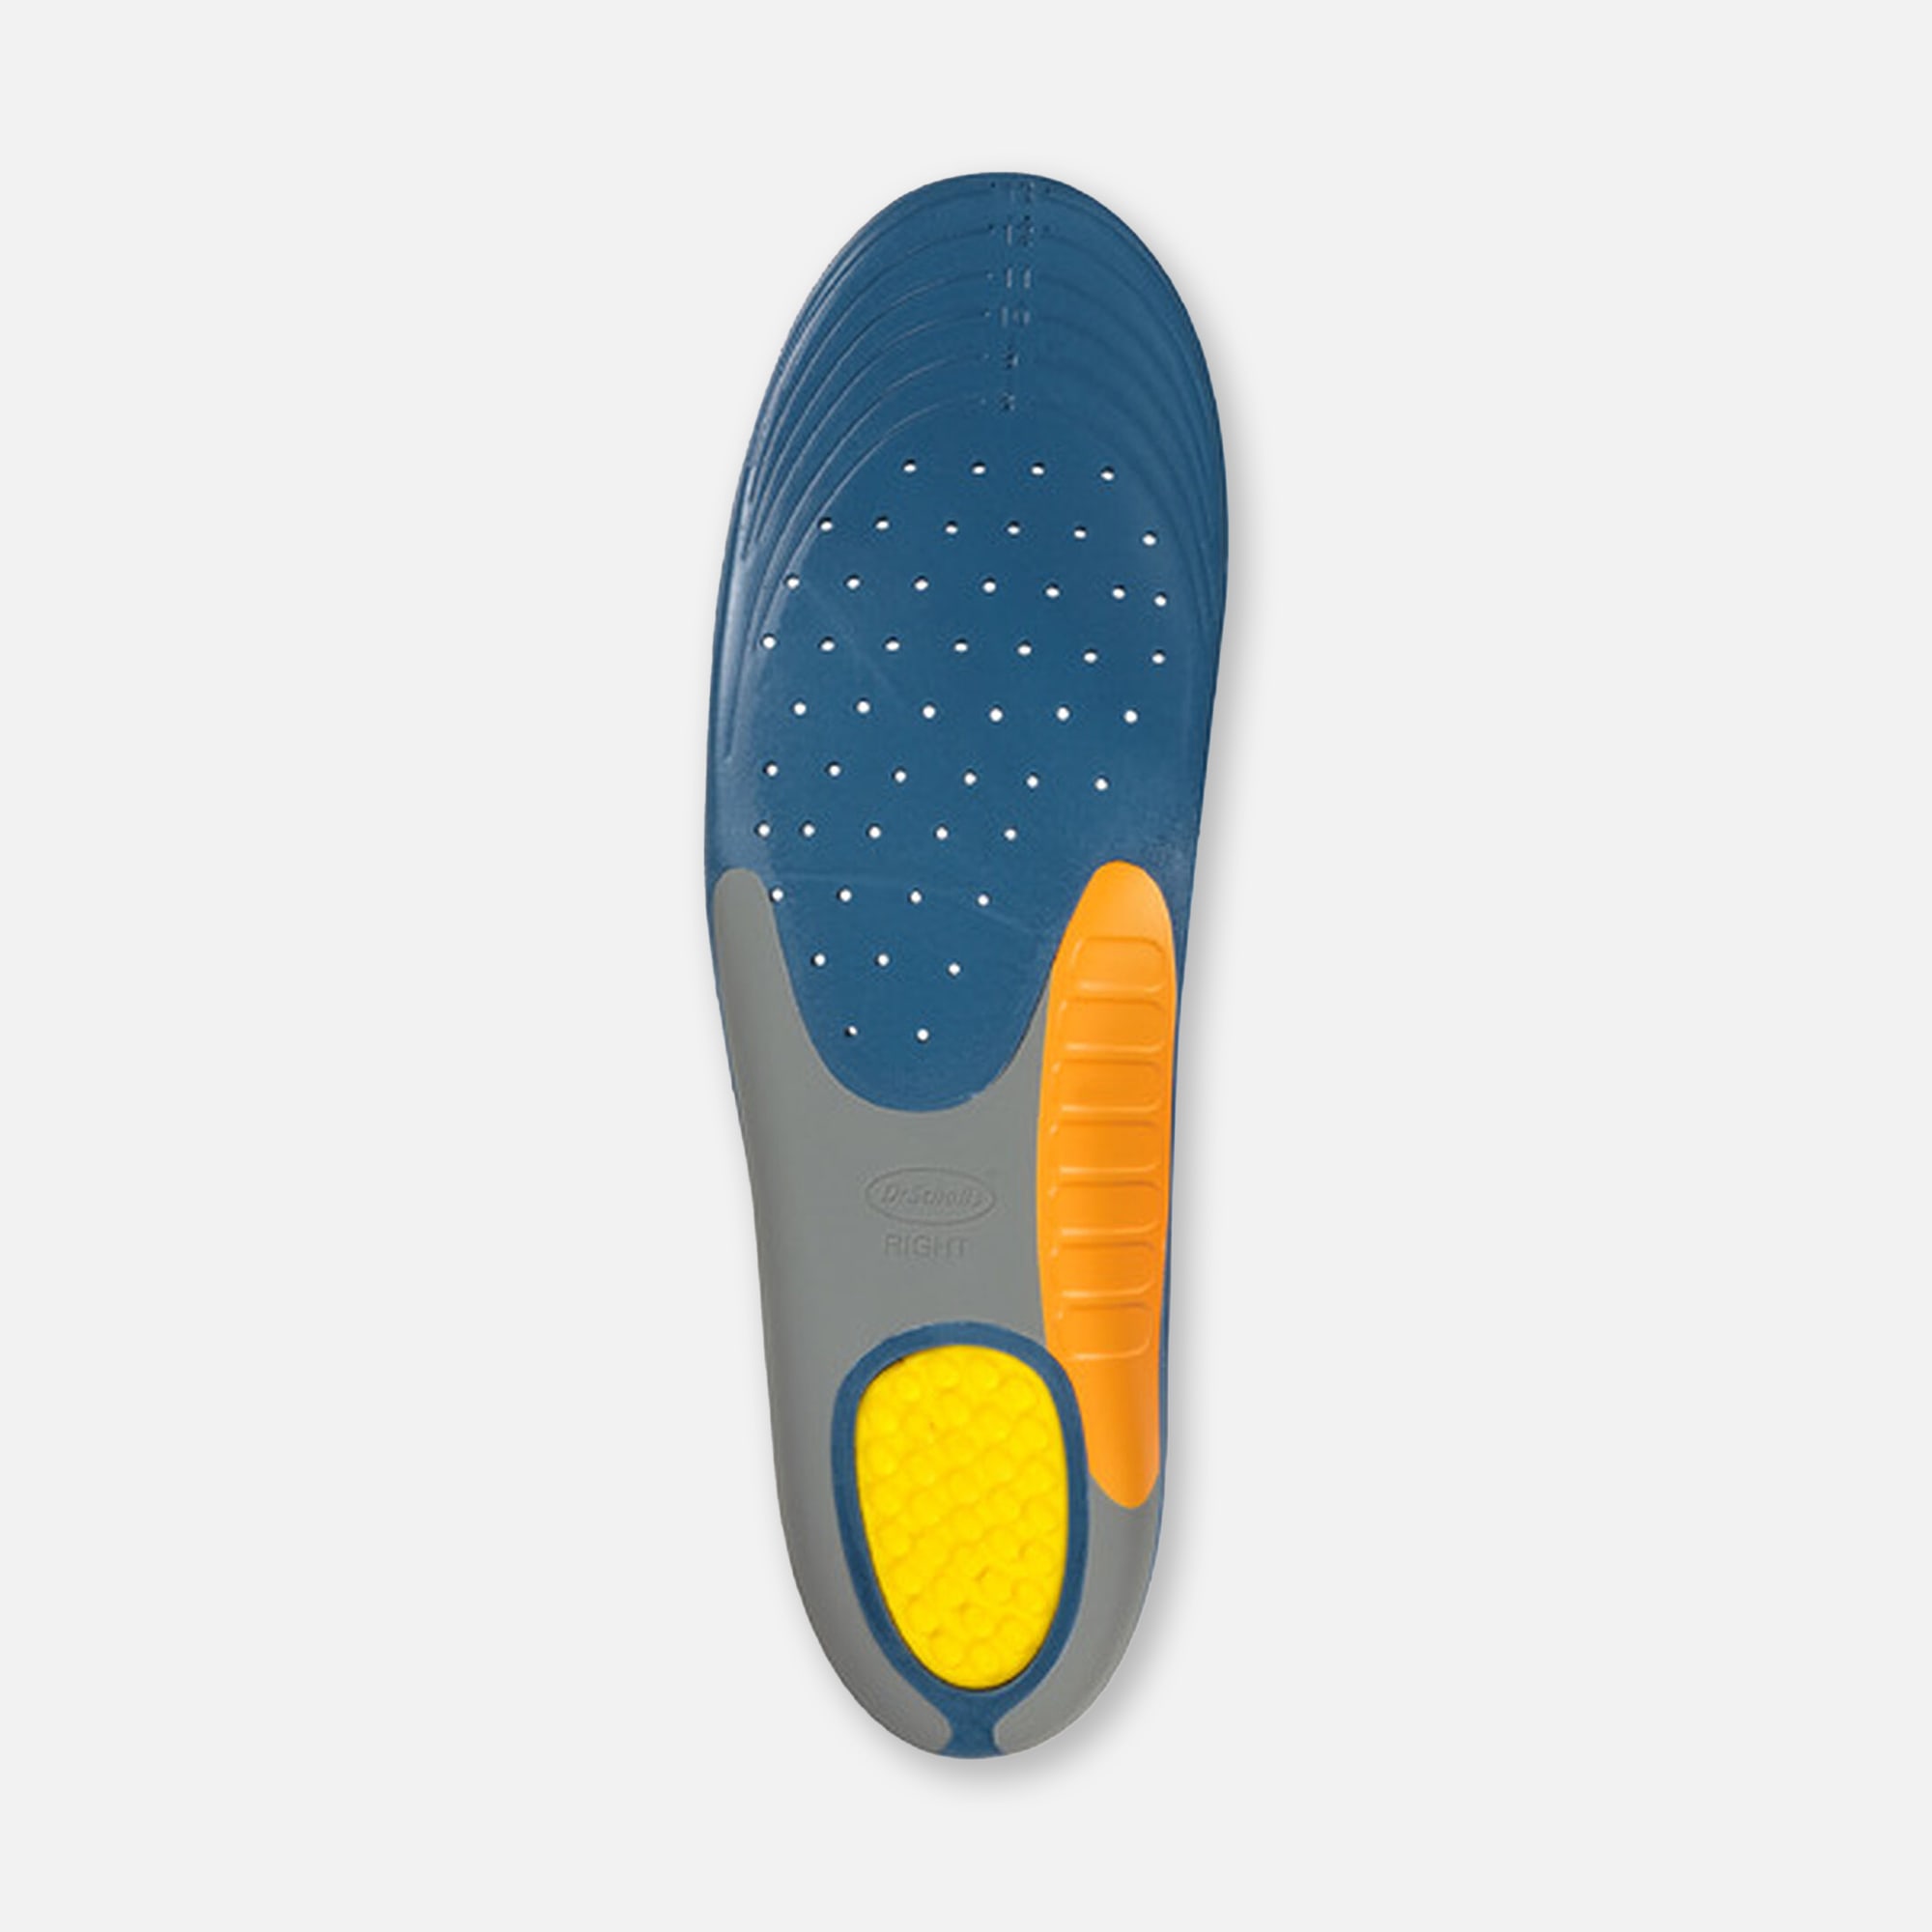 https://hsastore.com/on/demandware.static/-/Sites-hec-master/default/dw09a8a355/images/large/dr.-scholls-pain-relief-orthotics-for-heavy-duty-support-one-pair-25636-2.jpg